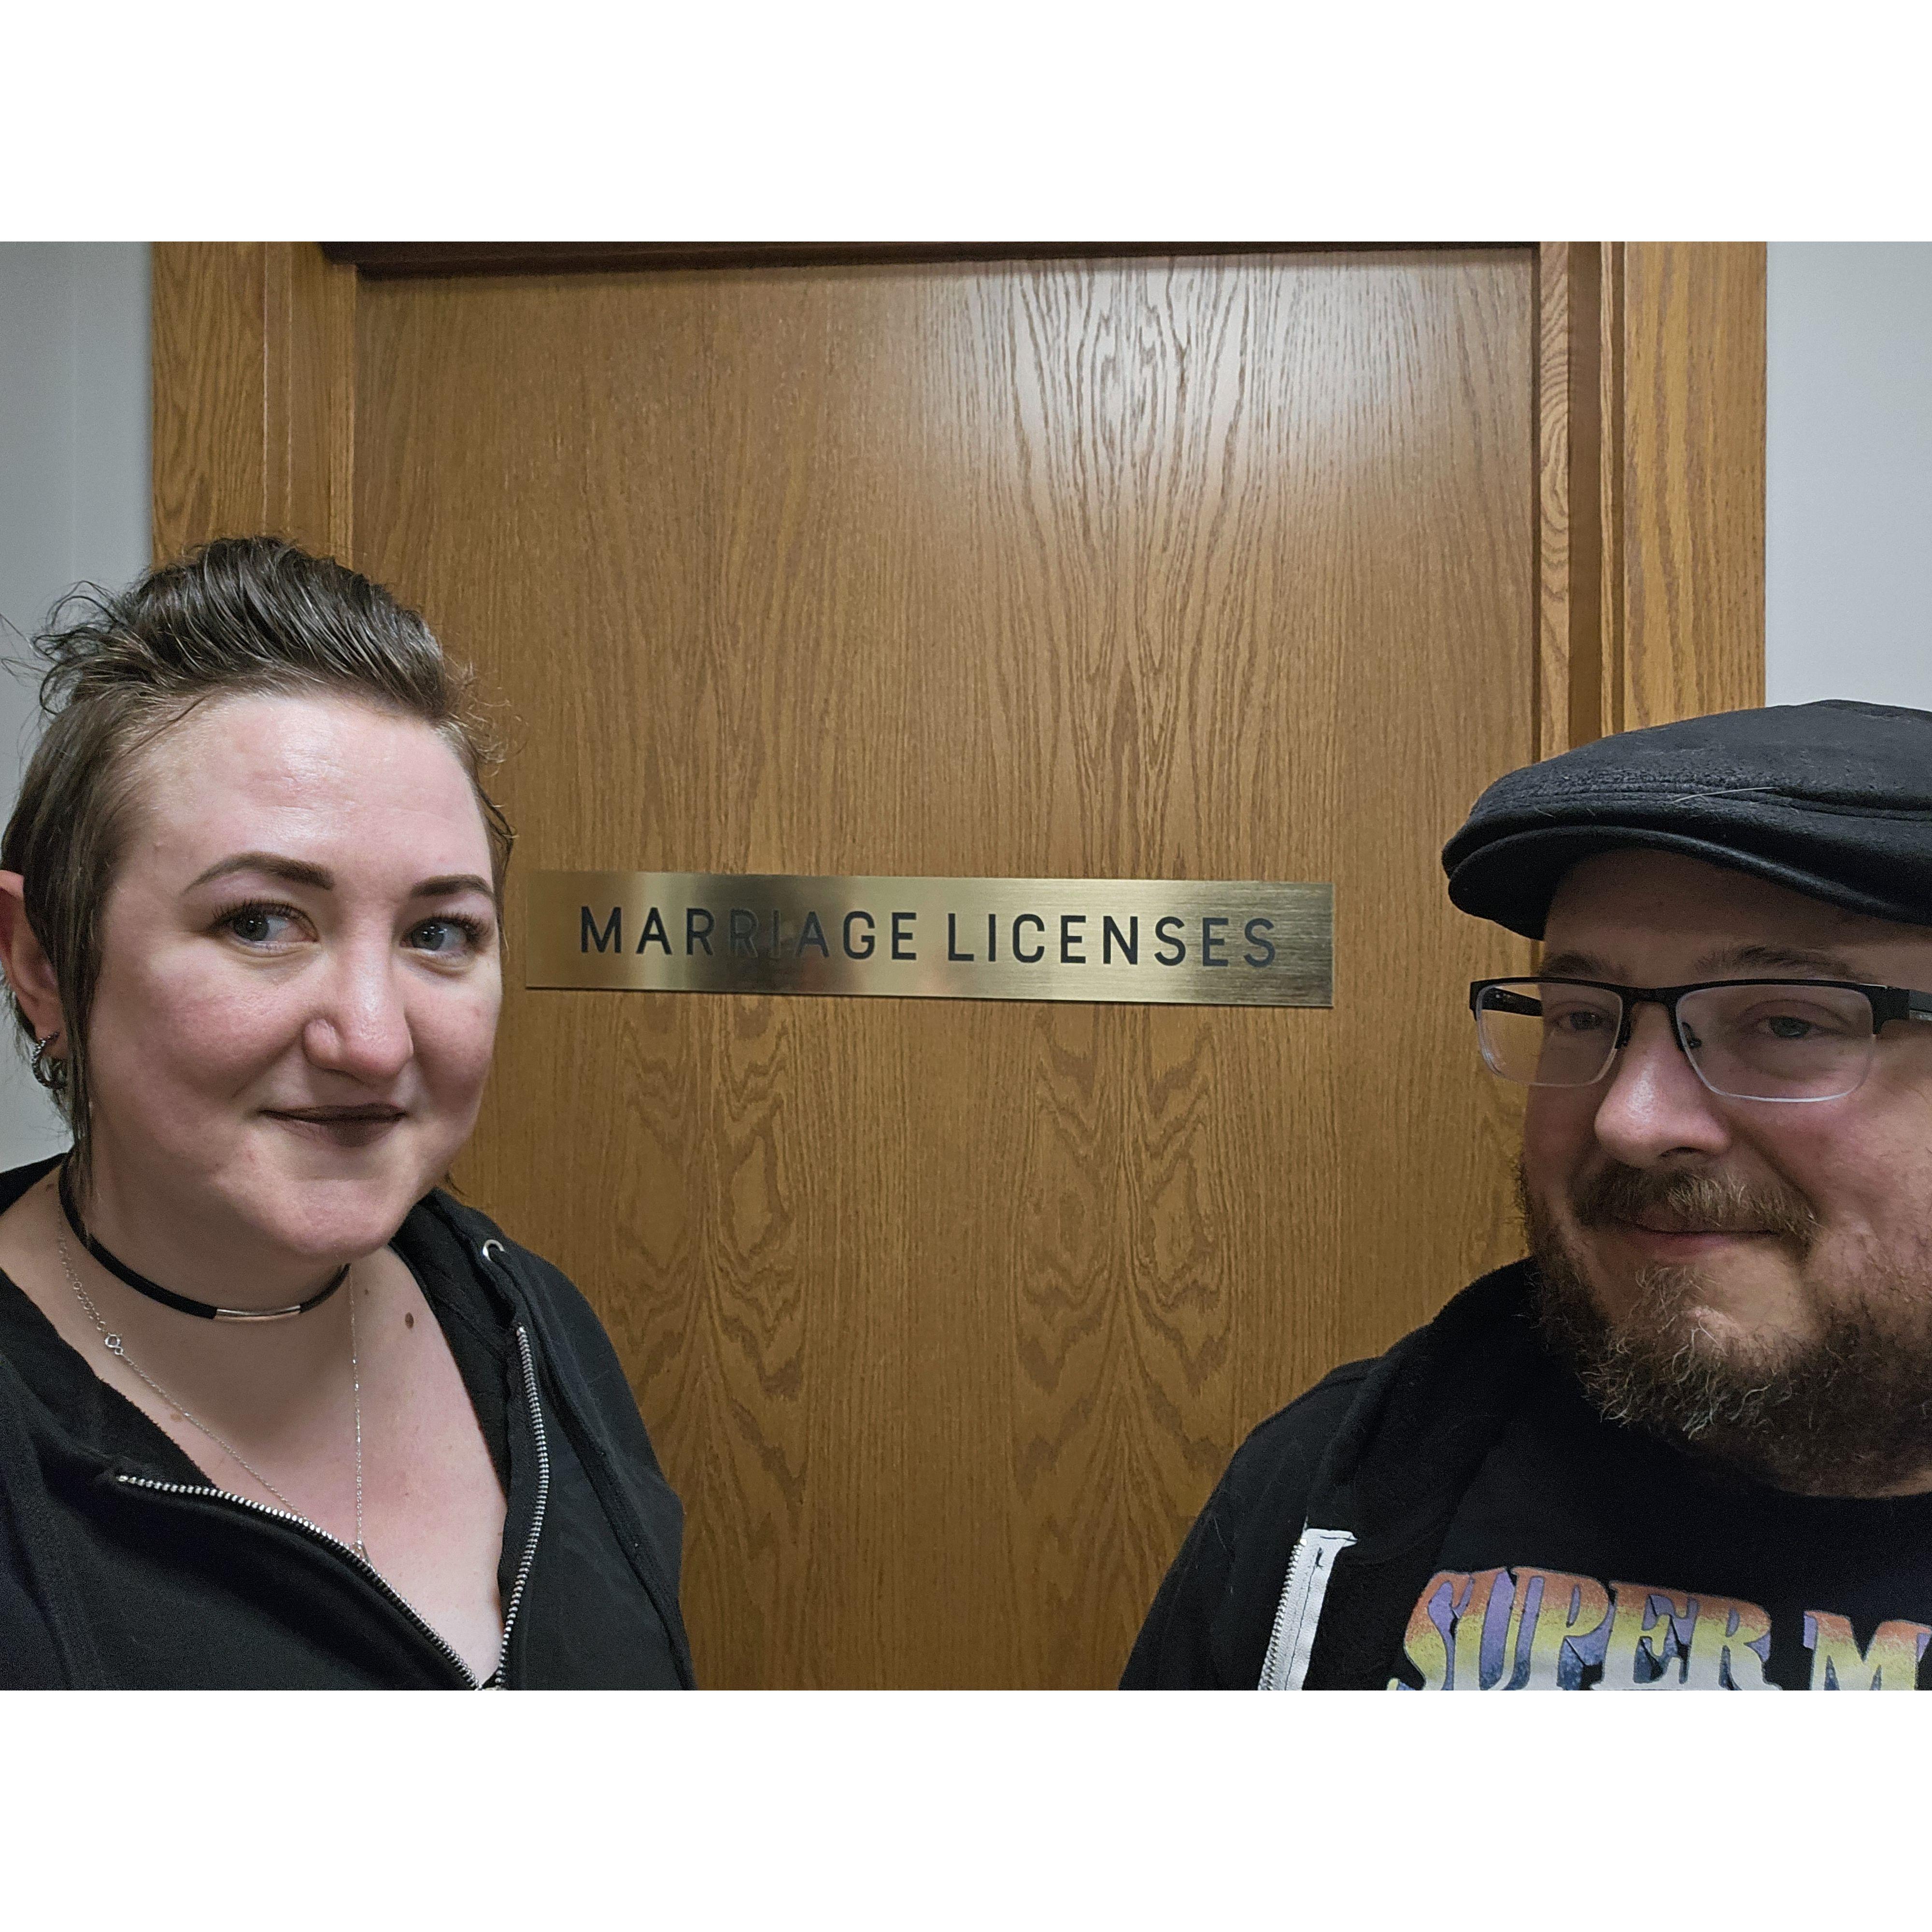 Very serious business! Birth certificates and licenses in hand - the couple took the first step to making things Official with the Winnebago County Clerk!